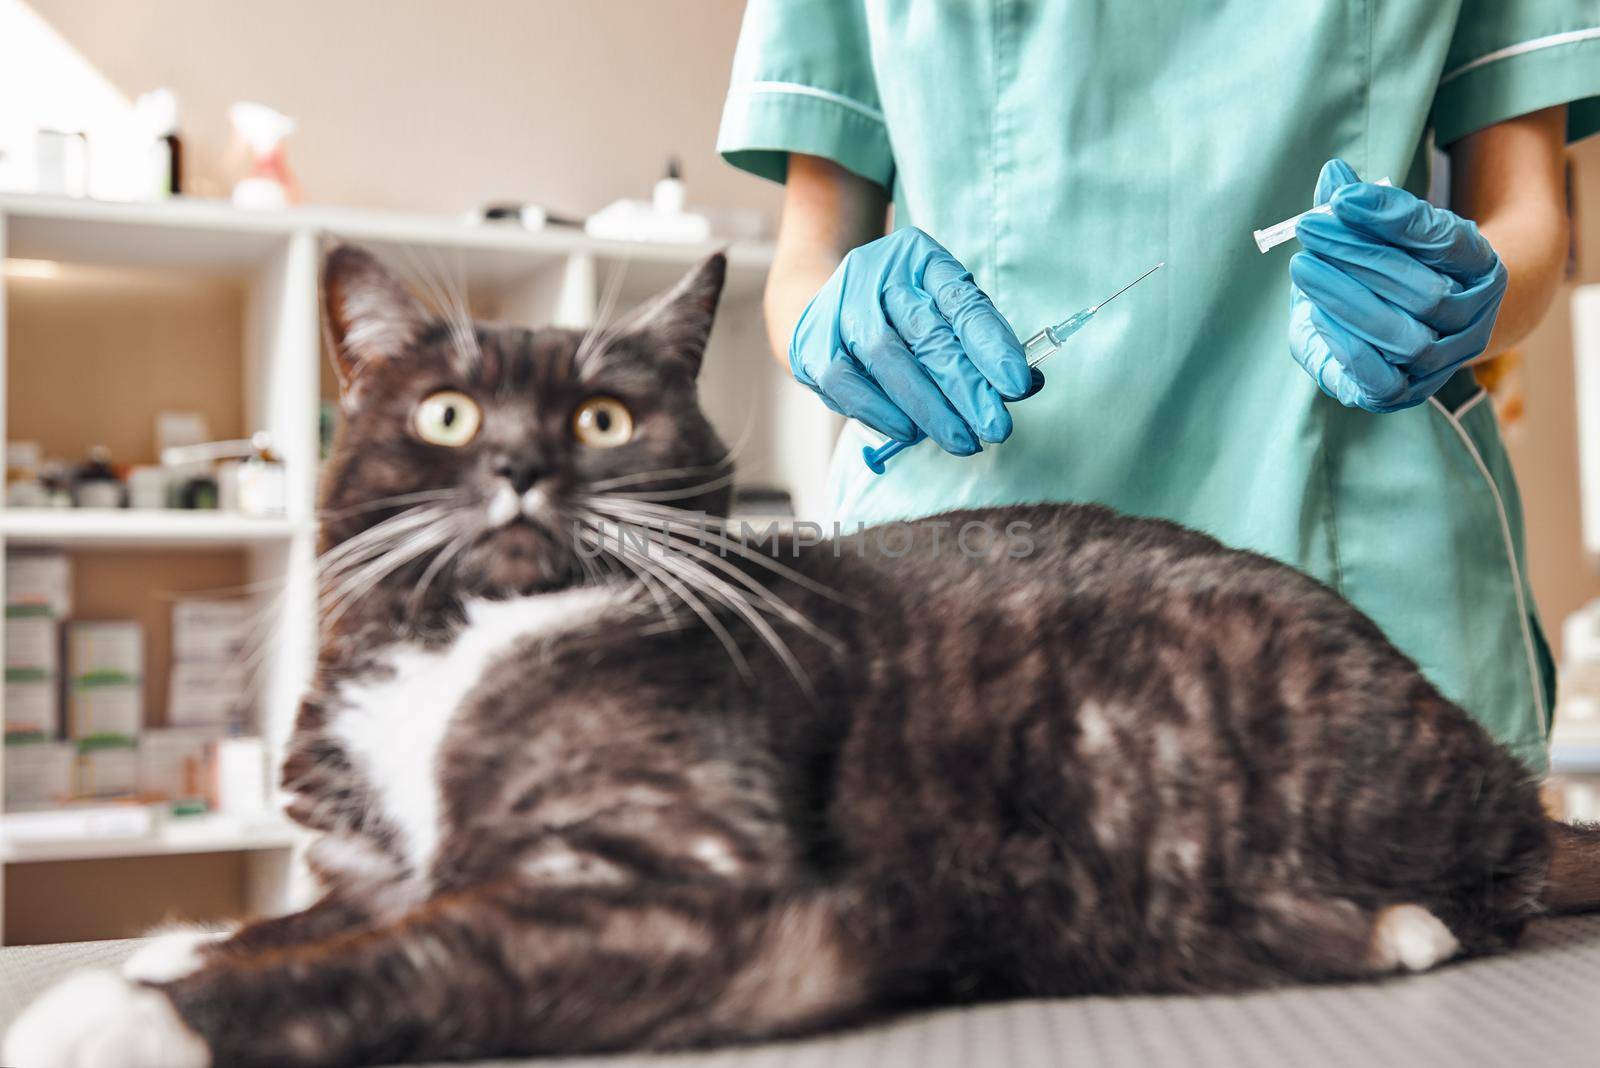 It's not scary Young female veterinarian in work uniform making an injection to a large black and fluffy cat lying on the table in veterinary clinic by friendsstock